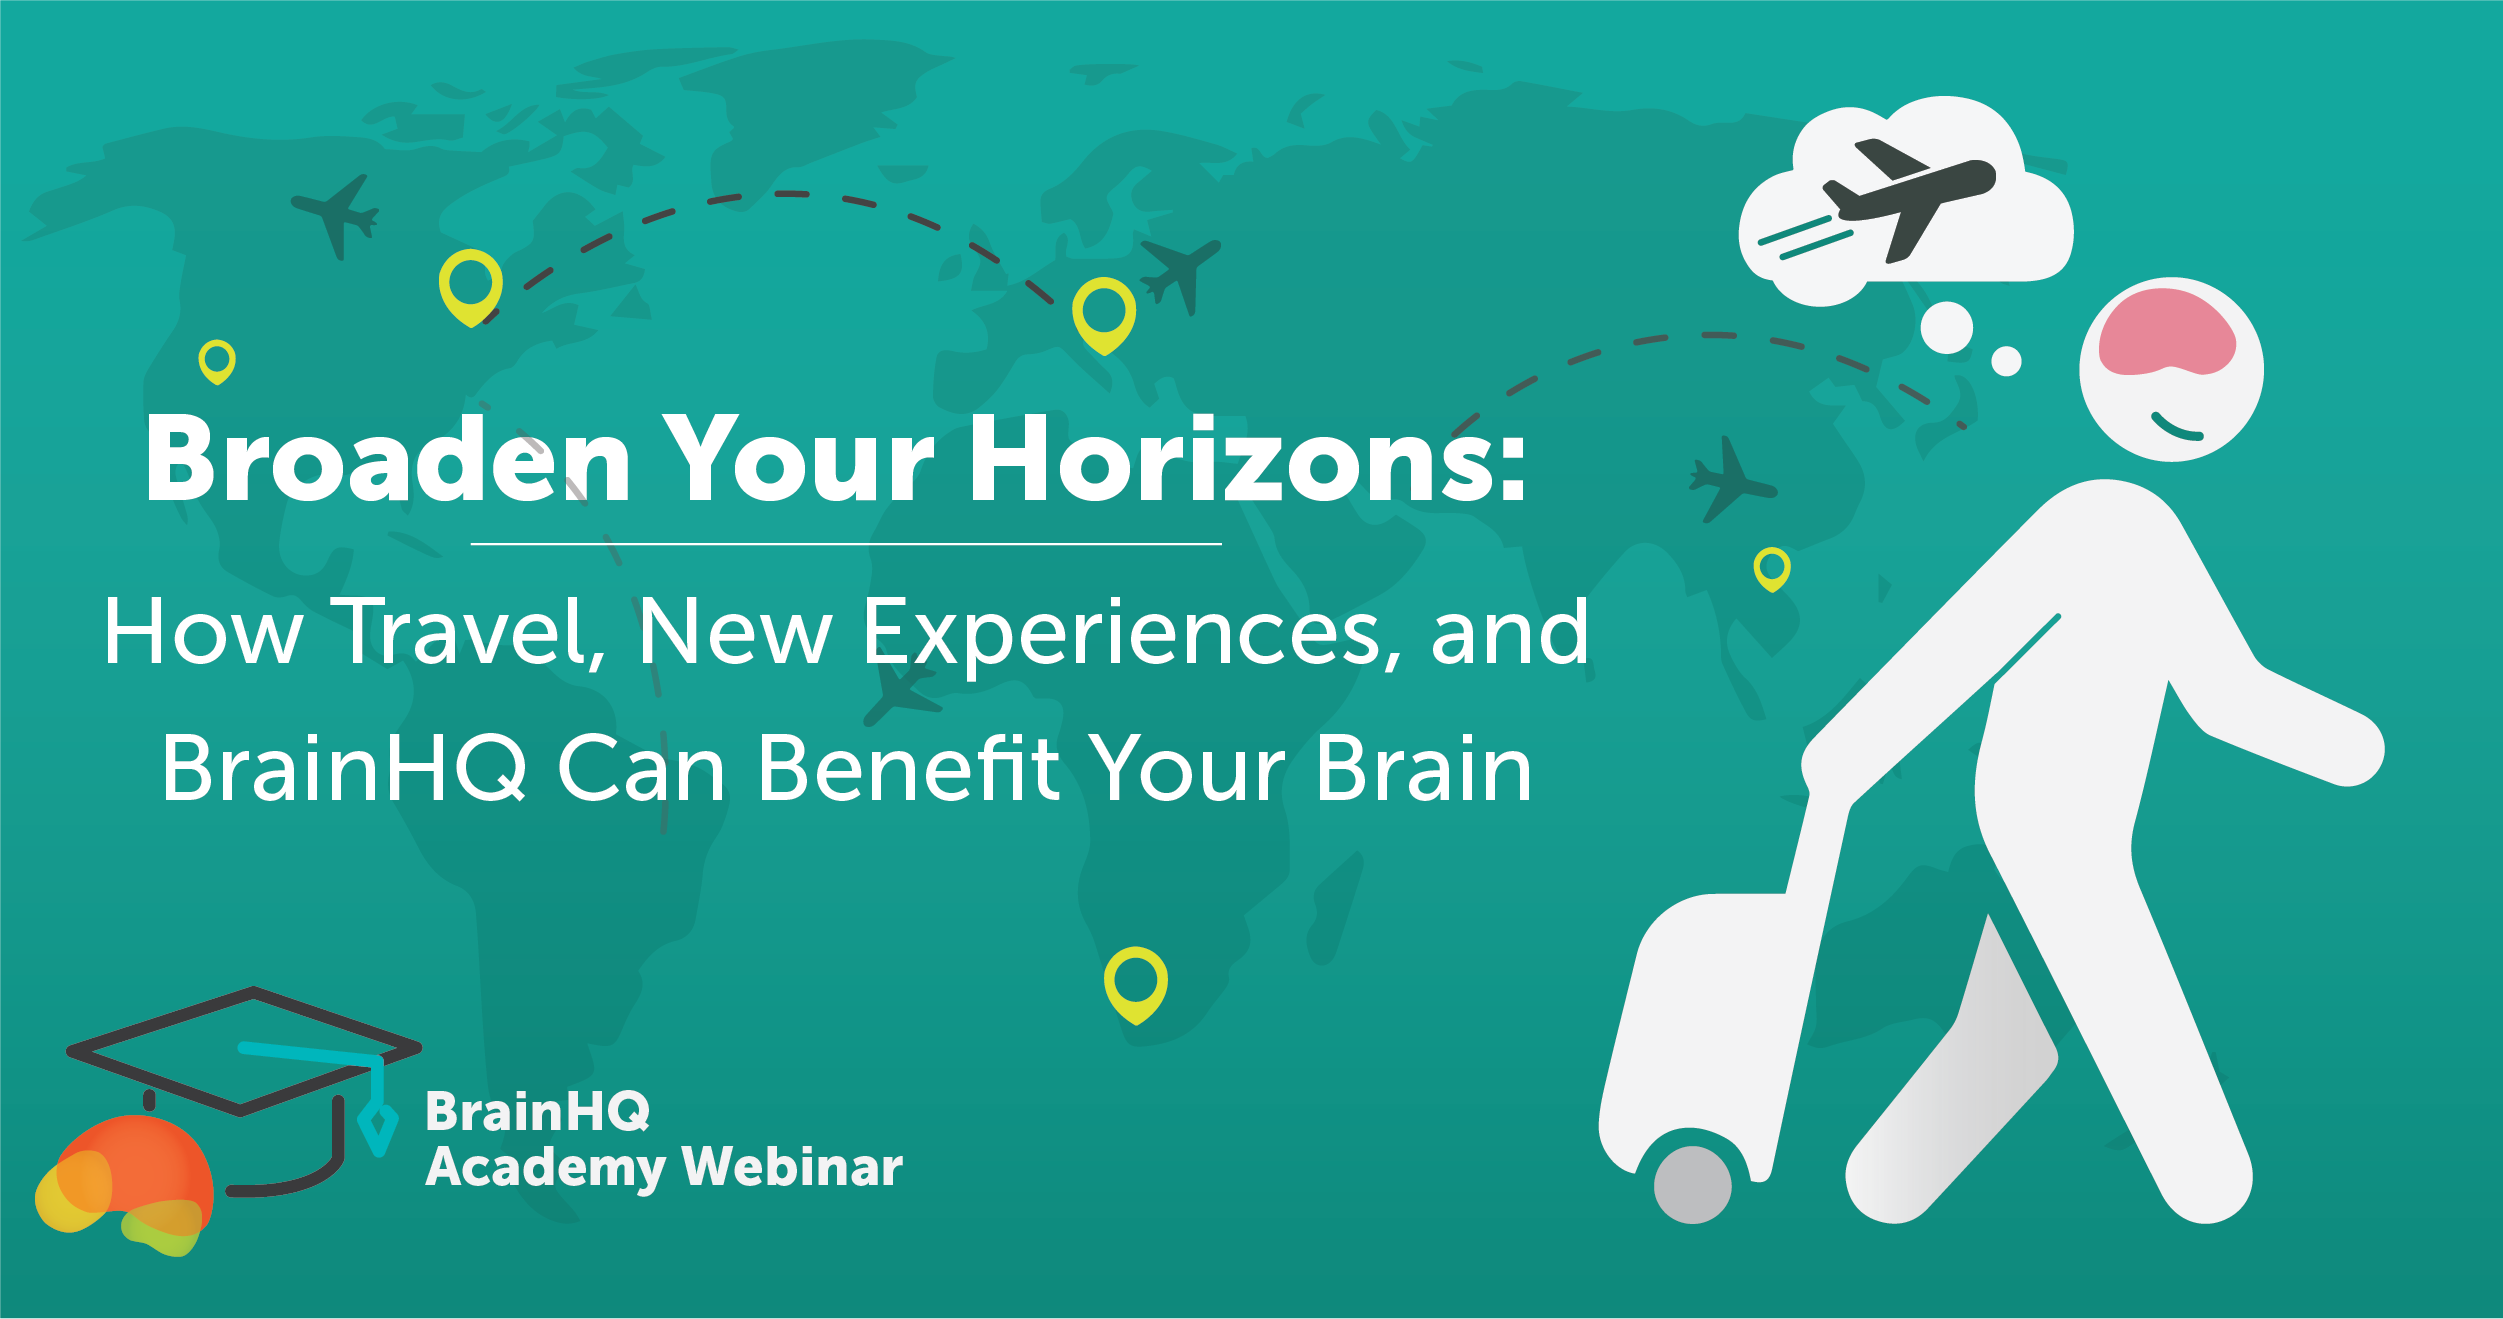 BrainHQ Academy: Broaden Your Horizons – How Travel, New Experiences, and BrainHQ Can Benefit Your Brain